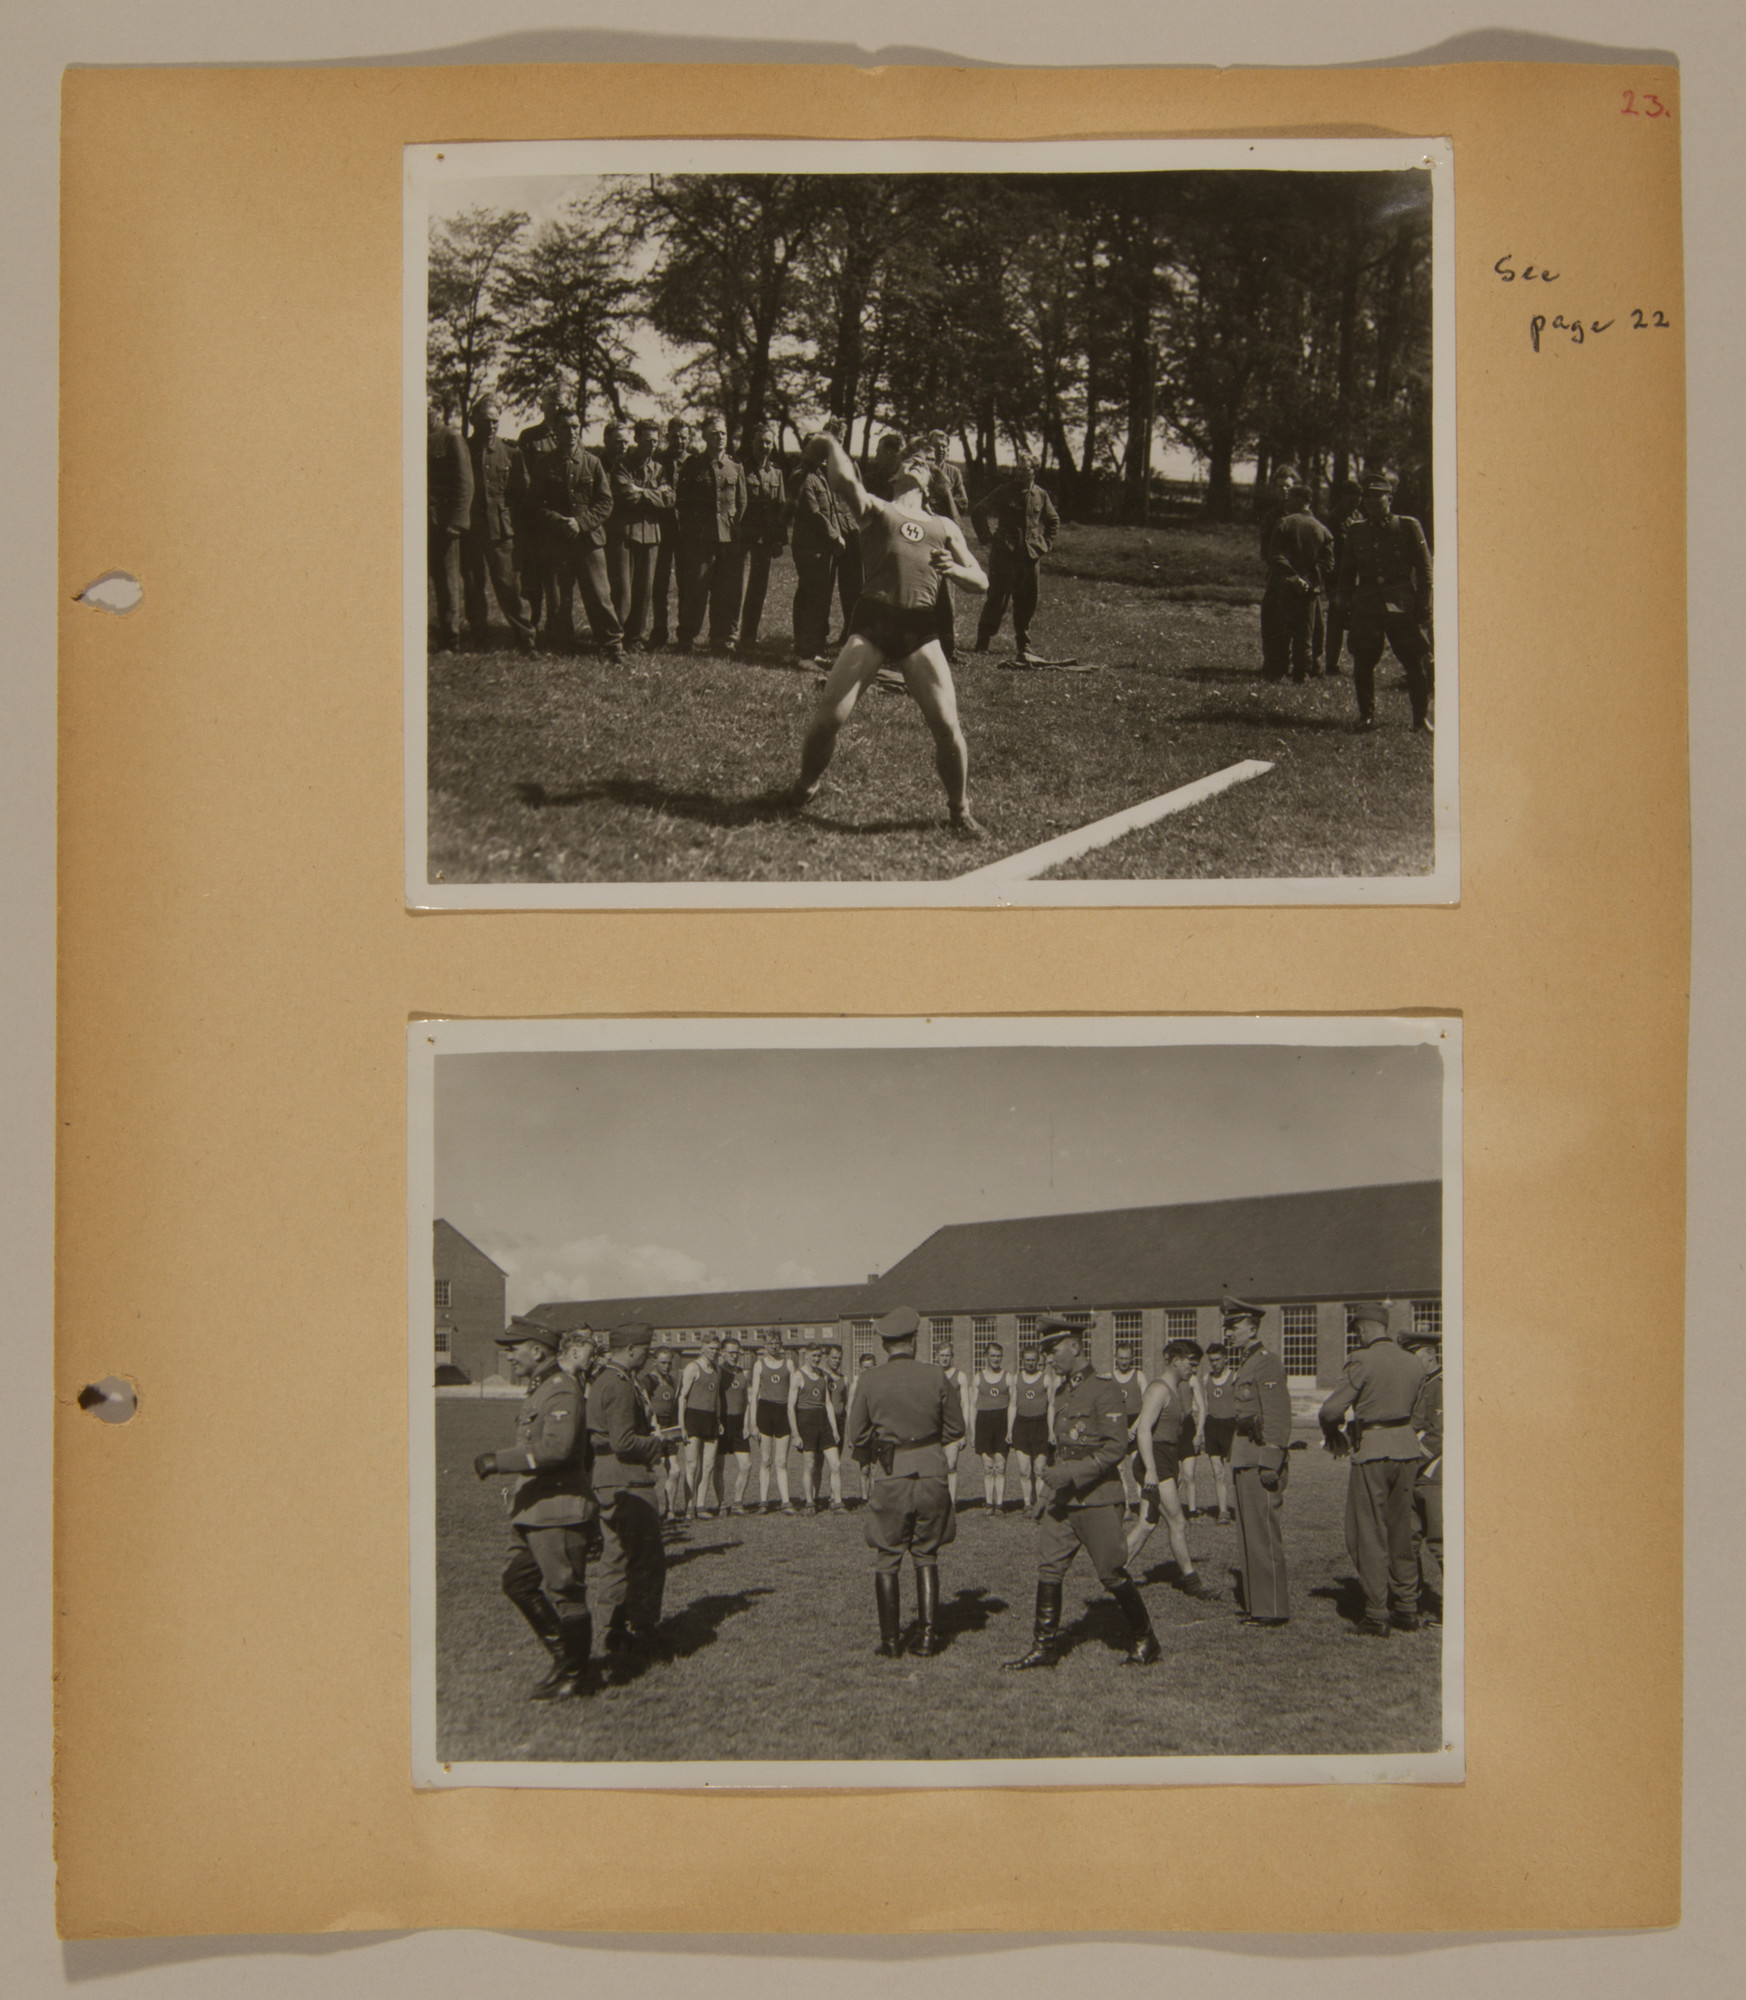 Page from volume three of a set of scrapbooks compiled by Bjorn Sibbern, a Danish policeman and resistance member, documenting the German occupation of Denmark.

This page contains photos of Danish SS at a sporting event that were later used in Danish war crimes trials.